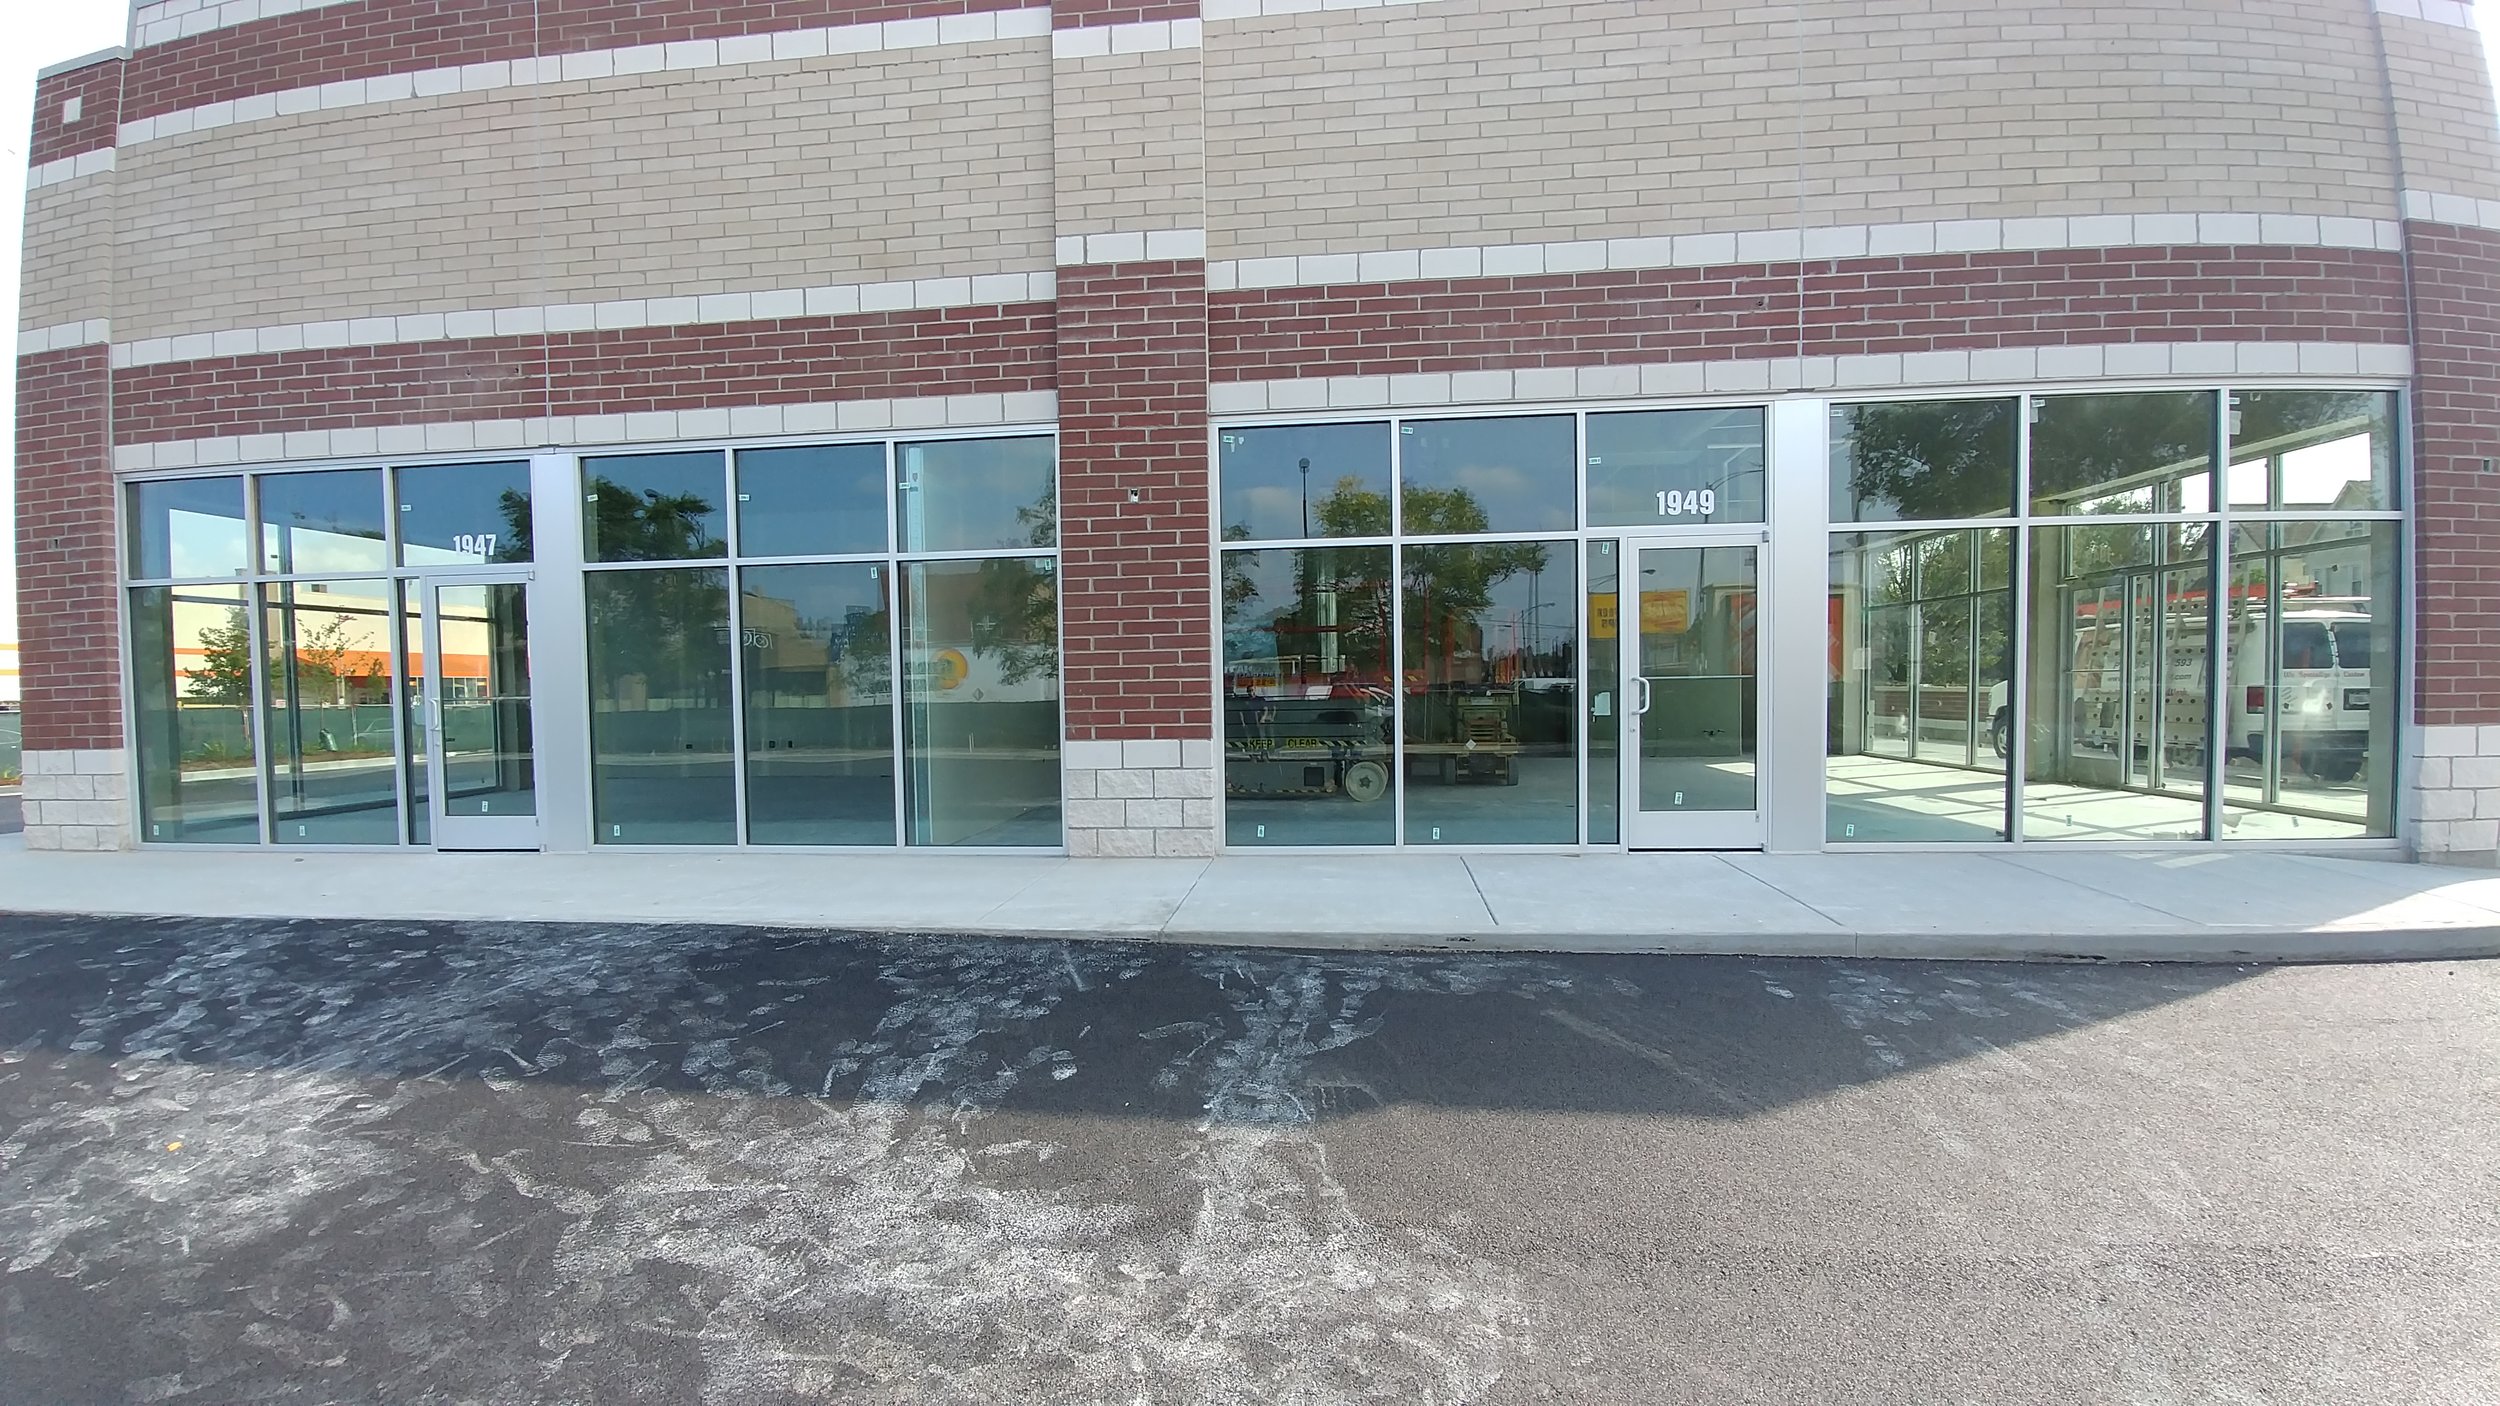 Cicero Armatage Commons - Storefront 1.1 - Chicago, Il.jpg